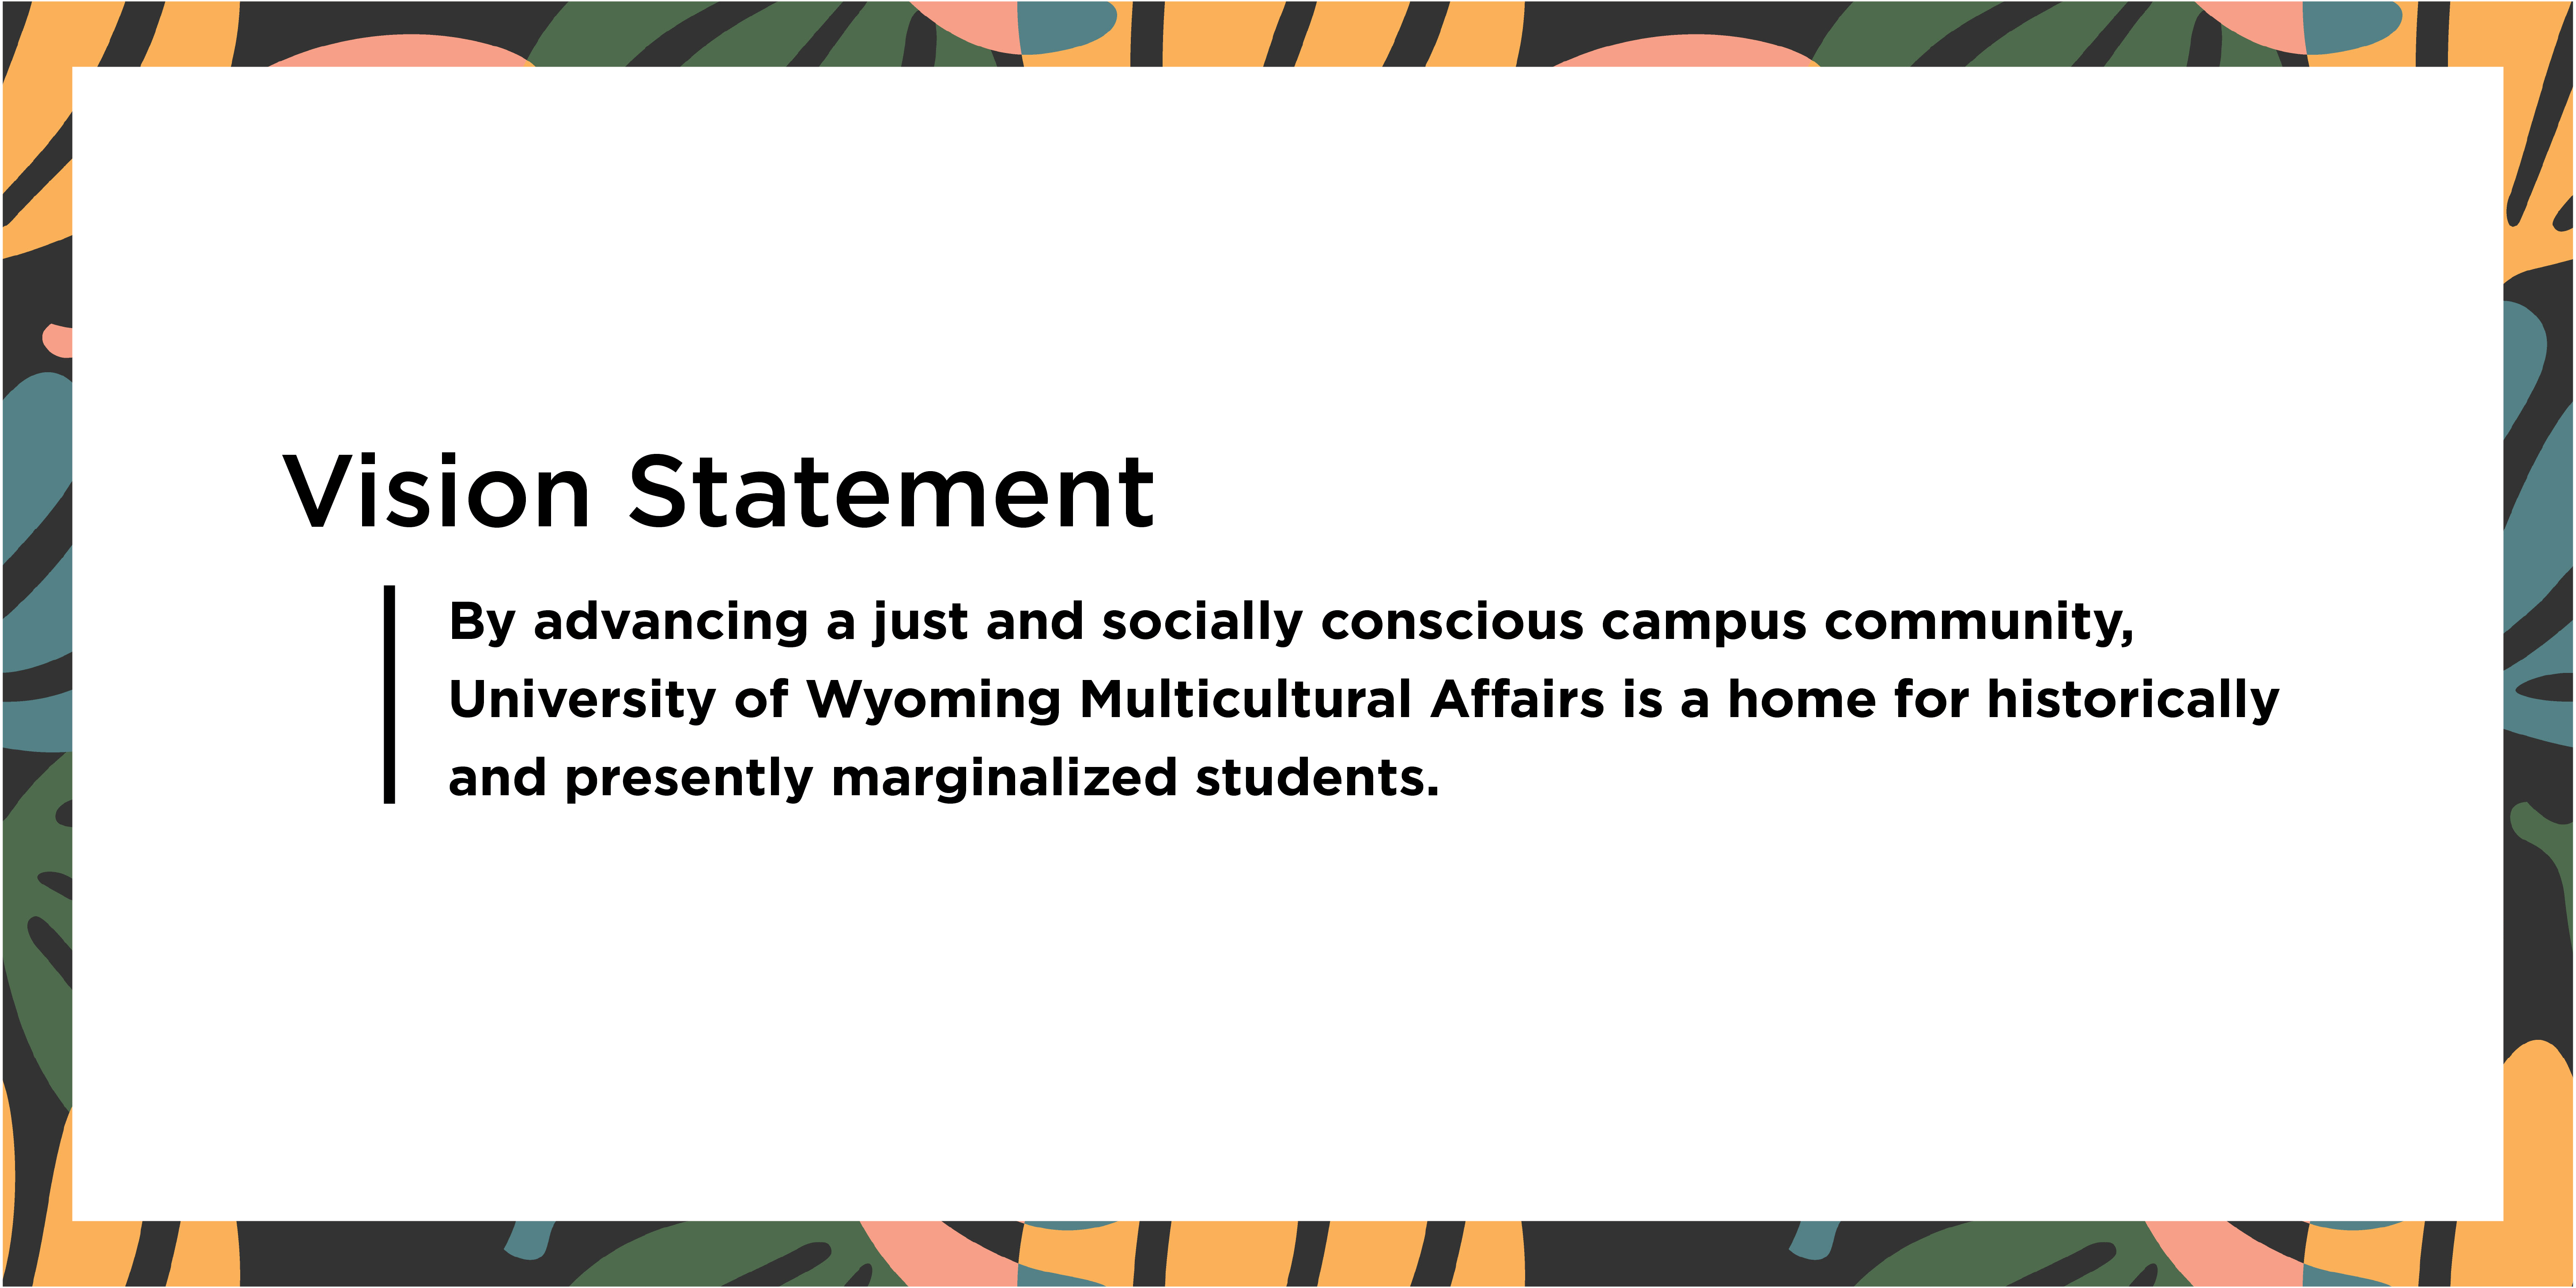 Vision Statement: By advancing a just and socially conscious campus community, University of Wyoming Multicultural Affairs is a home for historically and presently marginalized students.